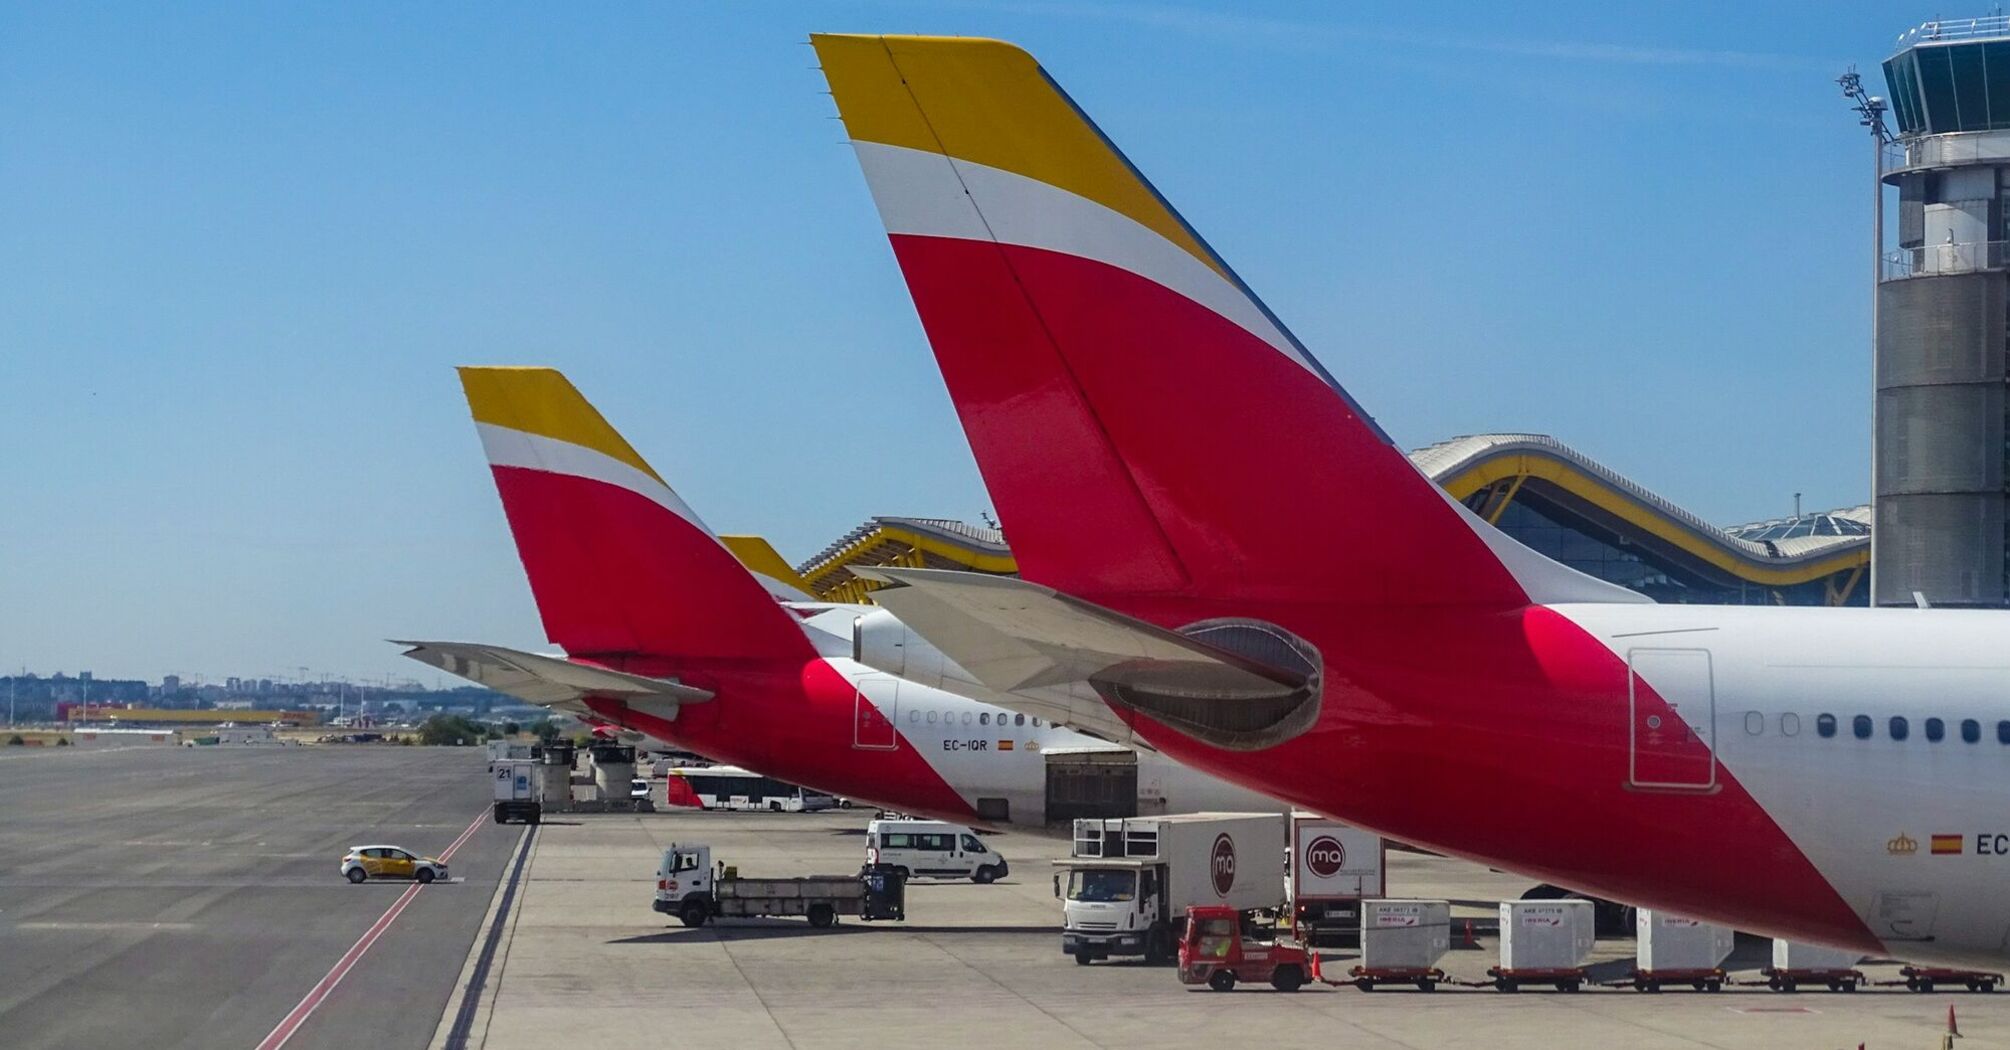 Iberia planes lined up at an airport, with distinctive red and yellow tail fins